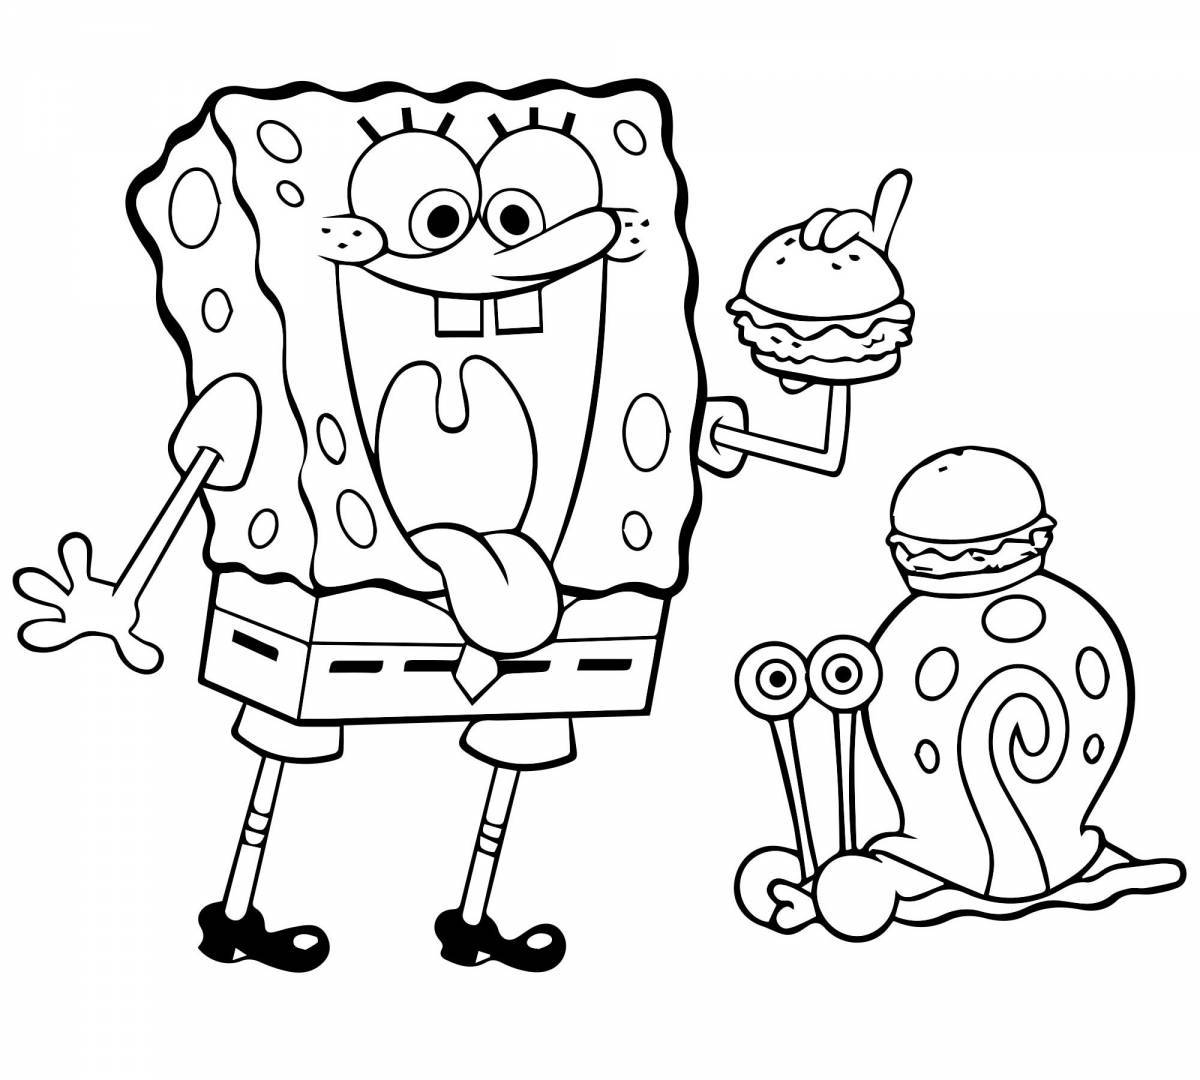 Intriguing squidward coloring book